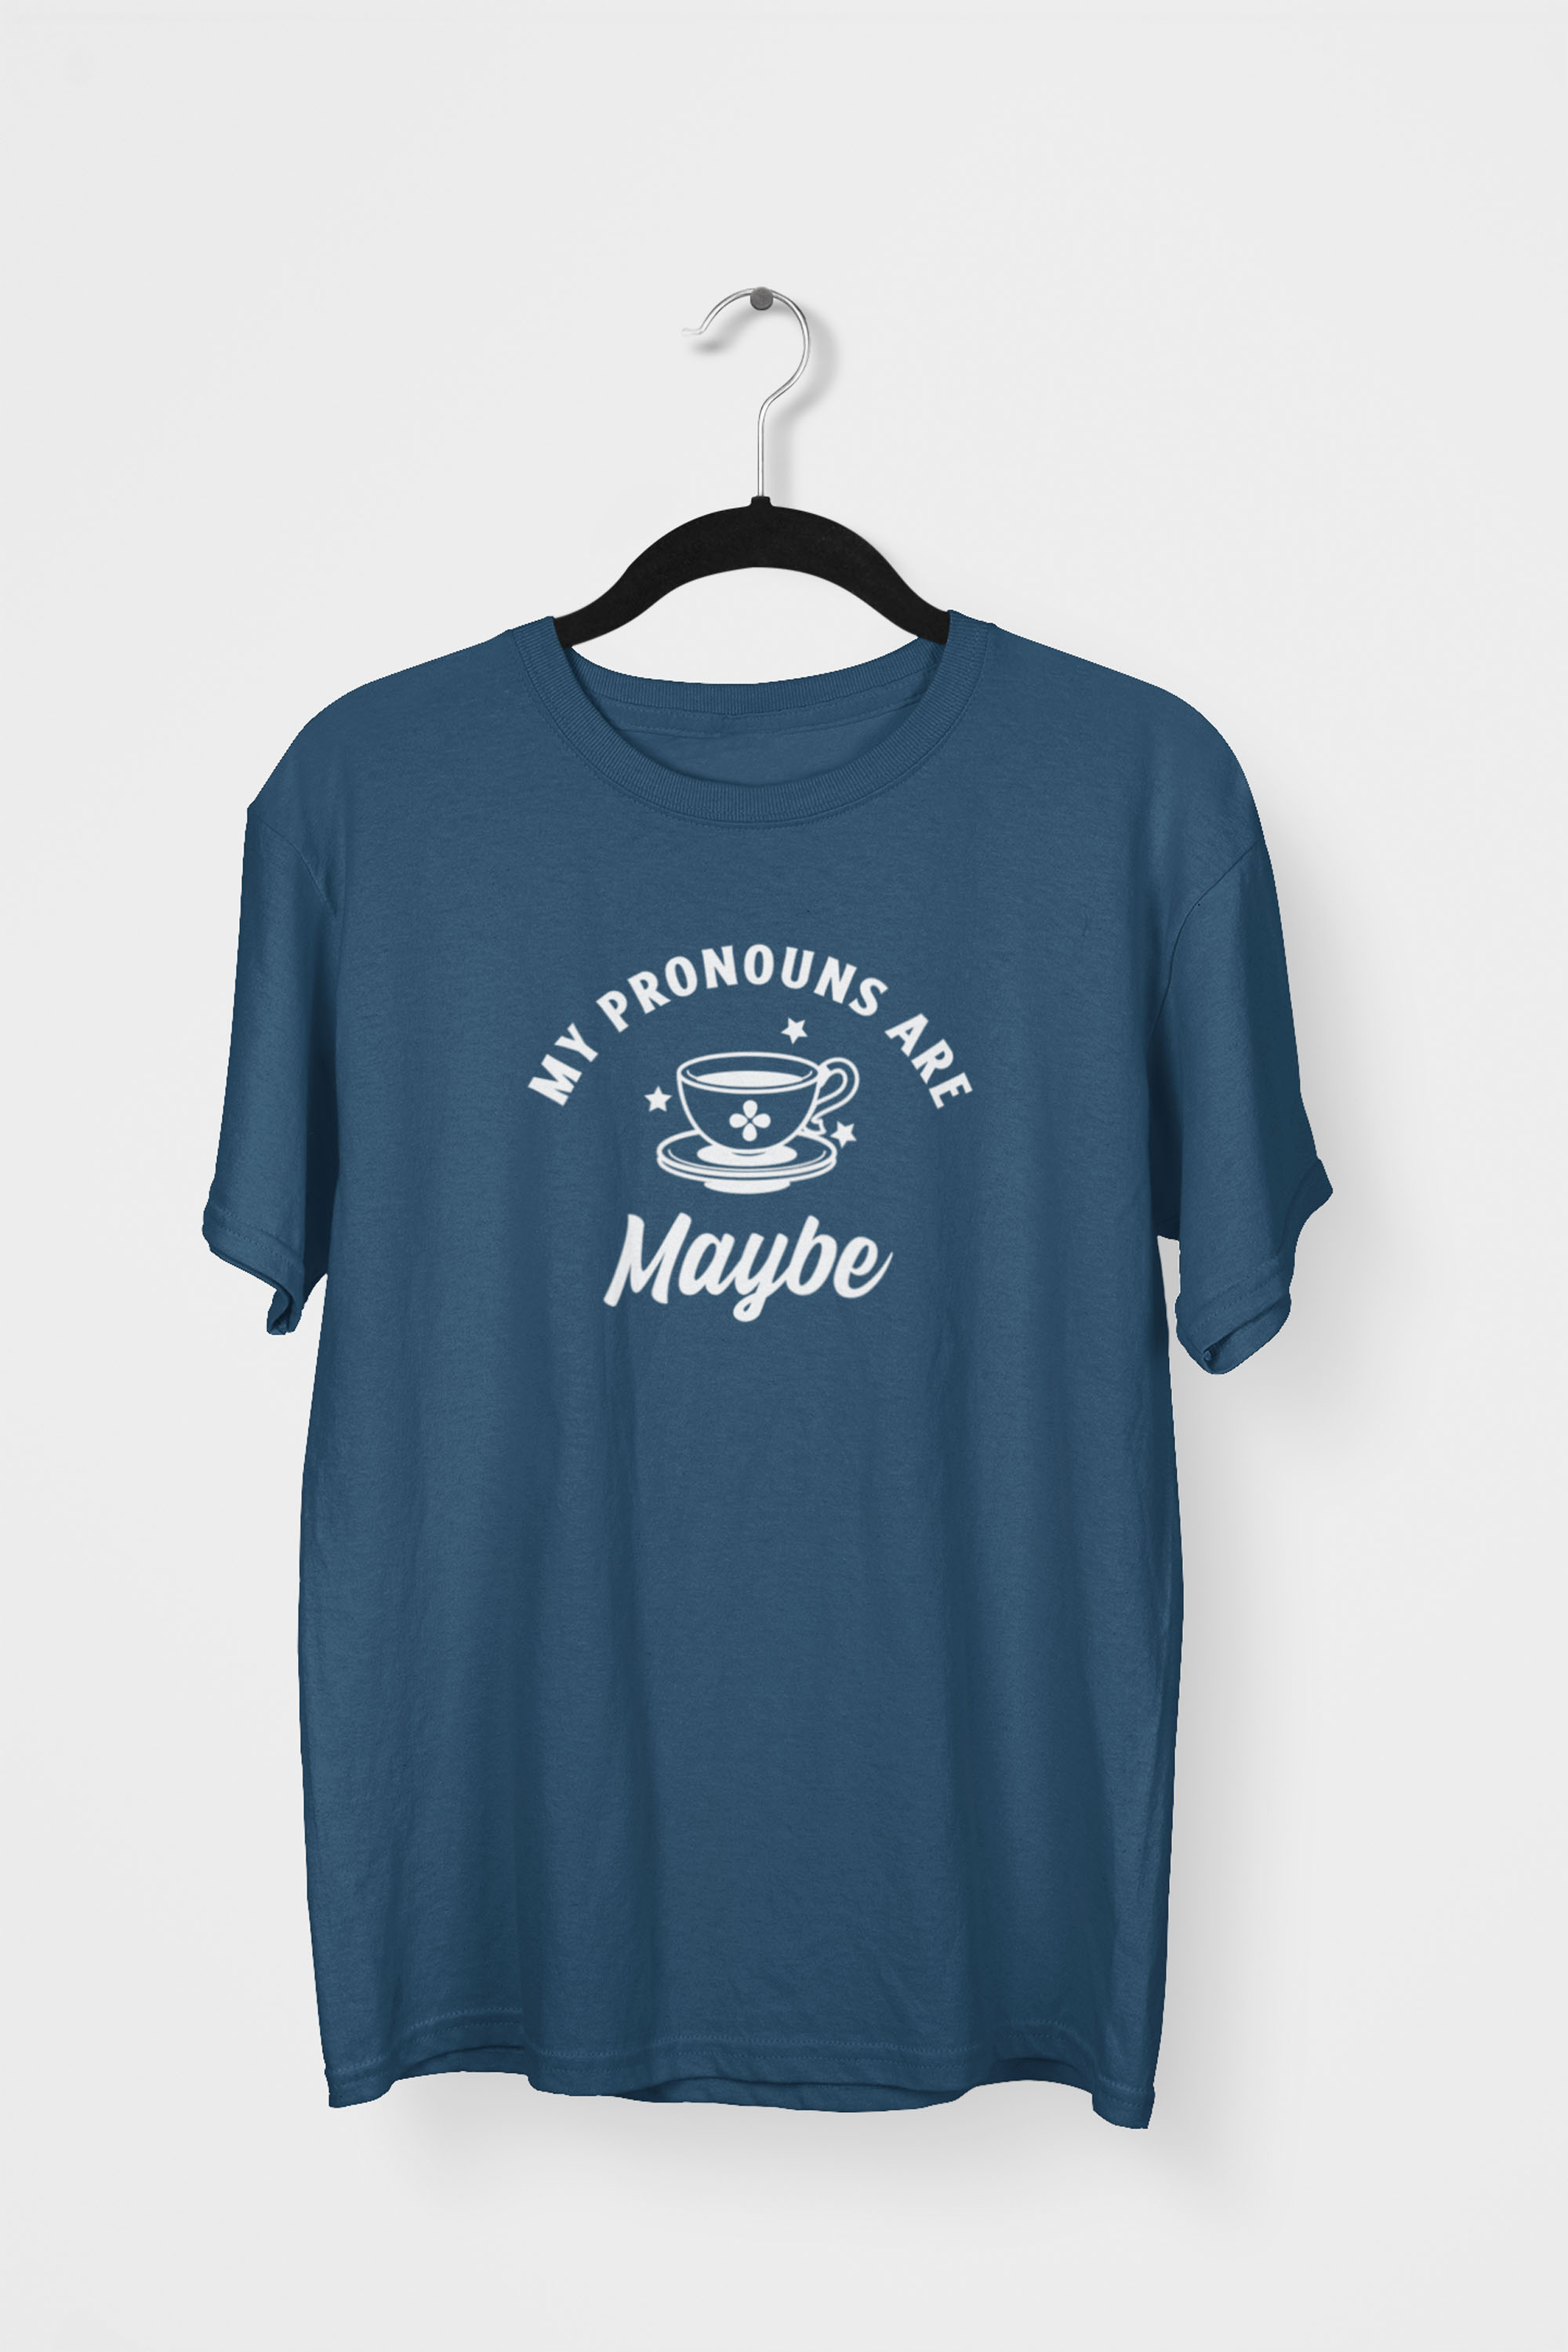 My Pronouns are Maybe T-shirt - Heather Navy